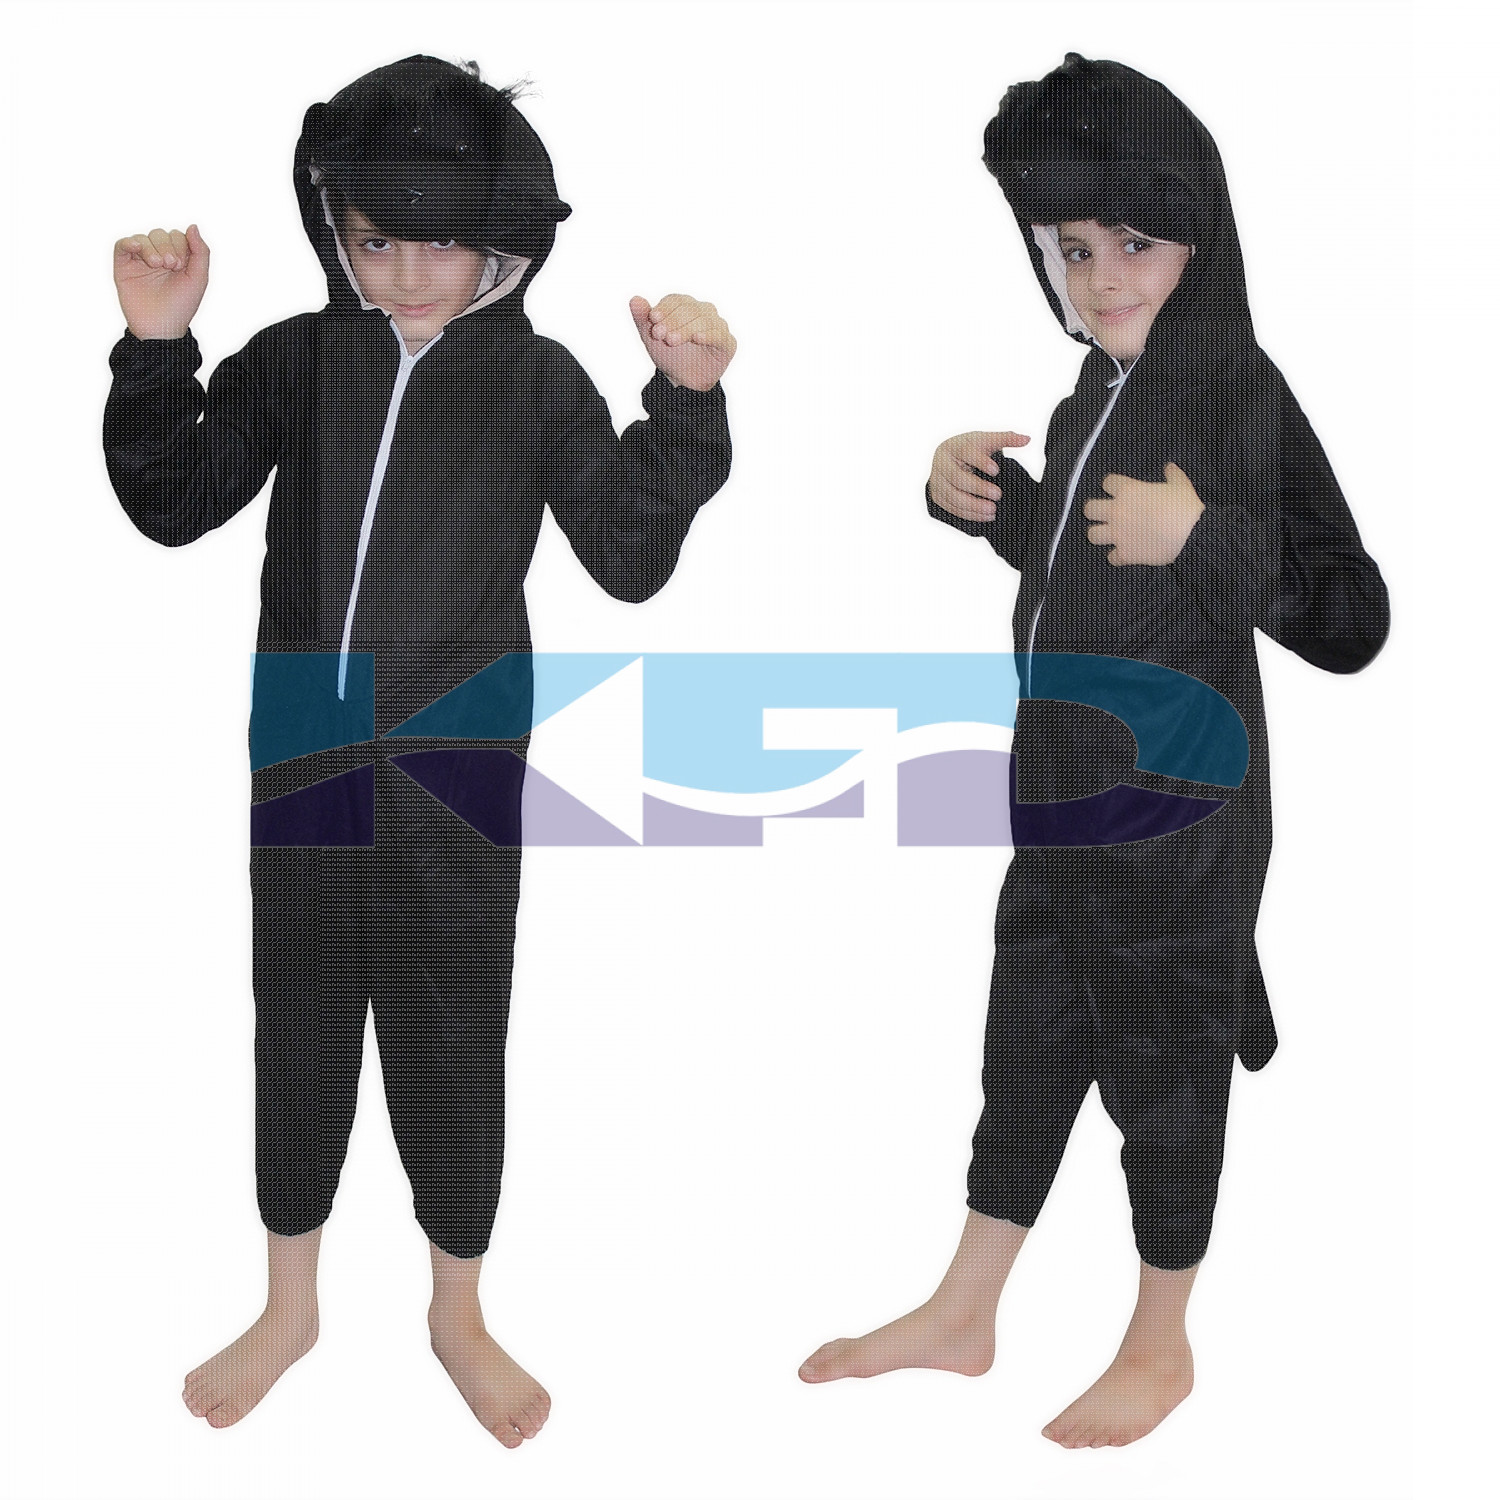 Gorilla fancy dress for kids,Wild Animal Costume for School Annual function/Theme Party/Competition/Stage Shows Dress